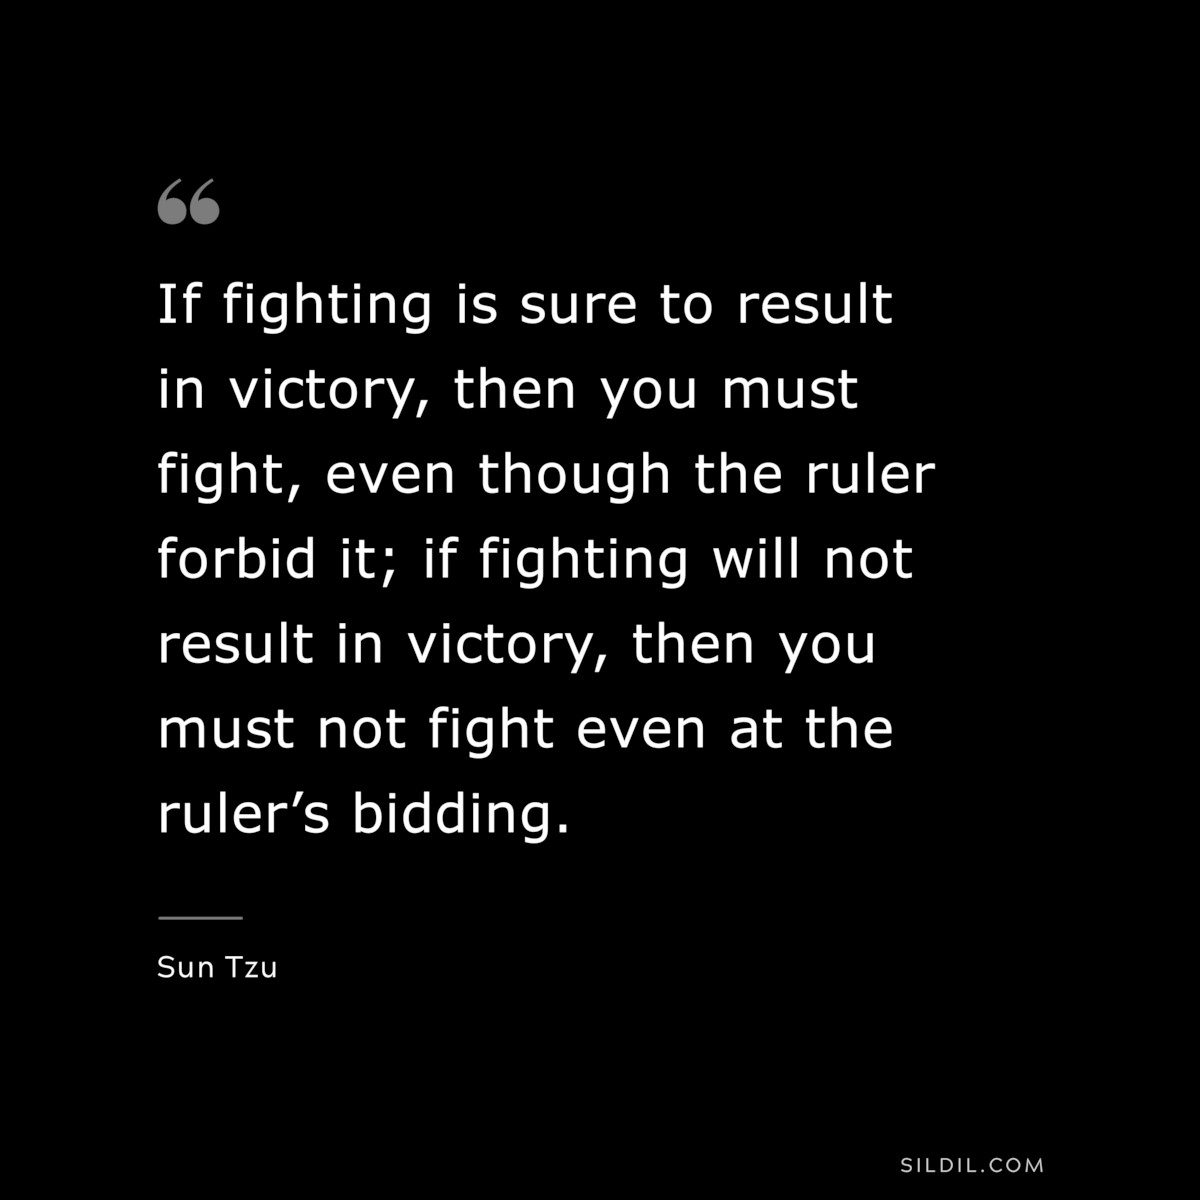 If fighting is sure to result in victory, then you must fight, even though the ruler forbid it; if fighting will not result in victory, then you must not fight even at the ruler’s bidding.― Sun Tzu